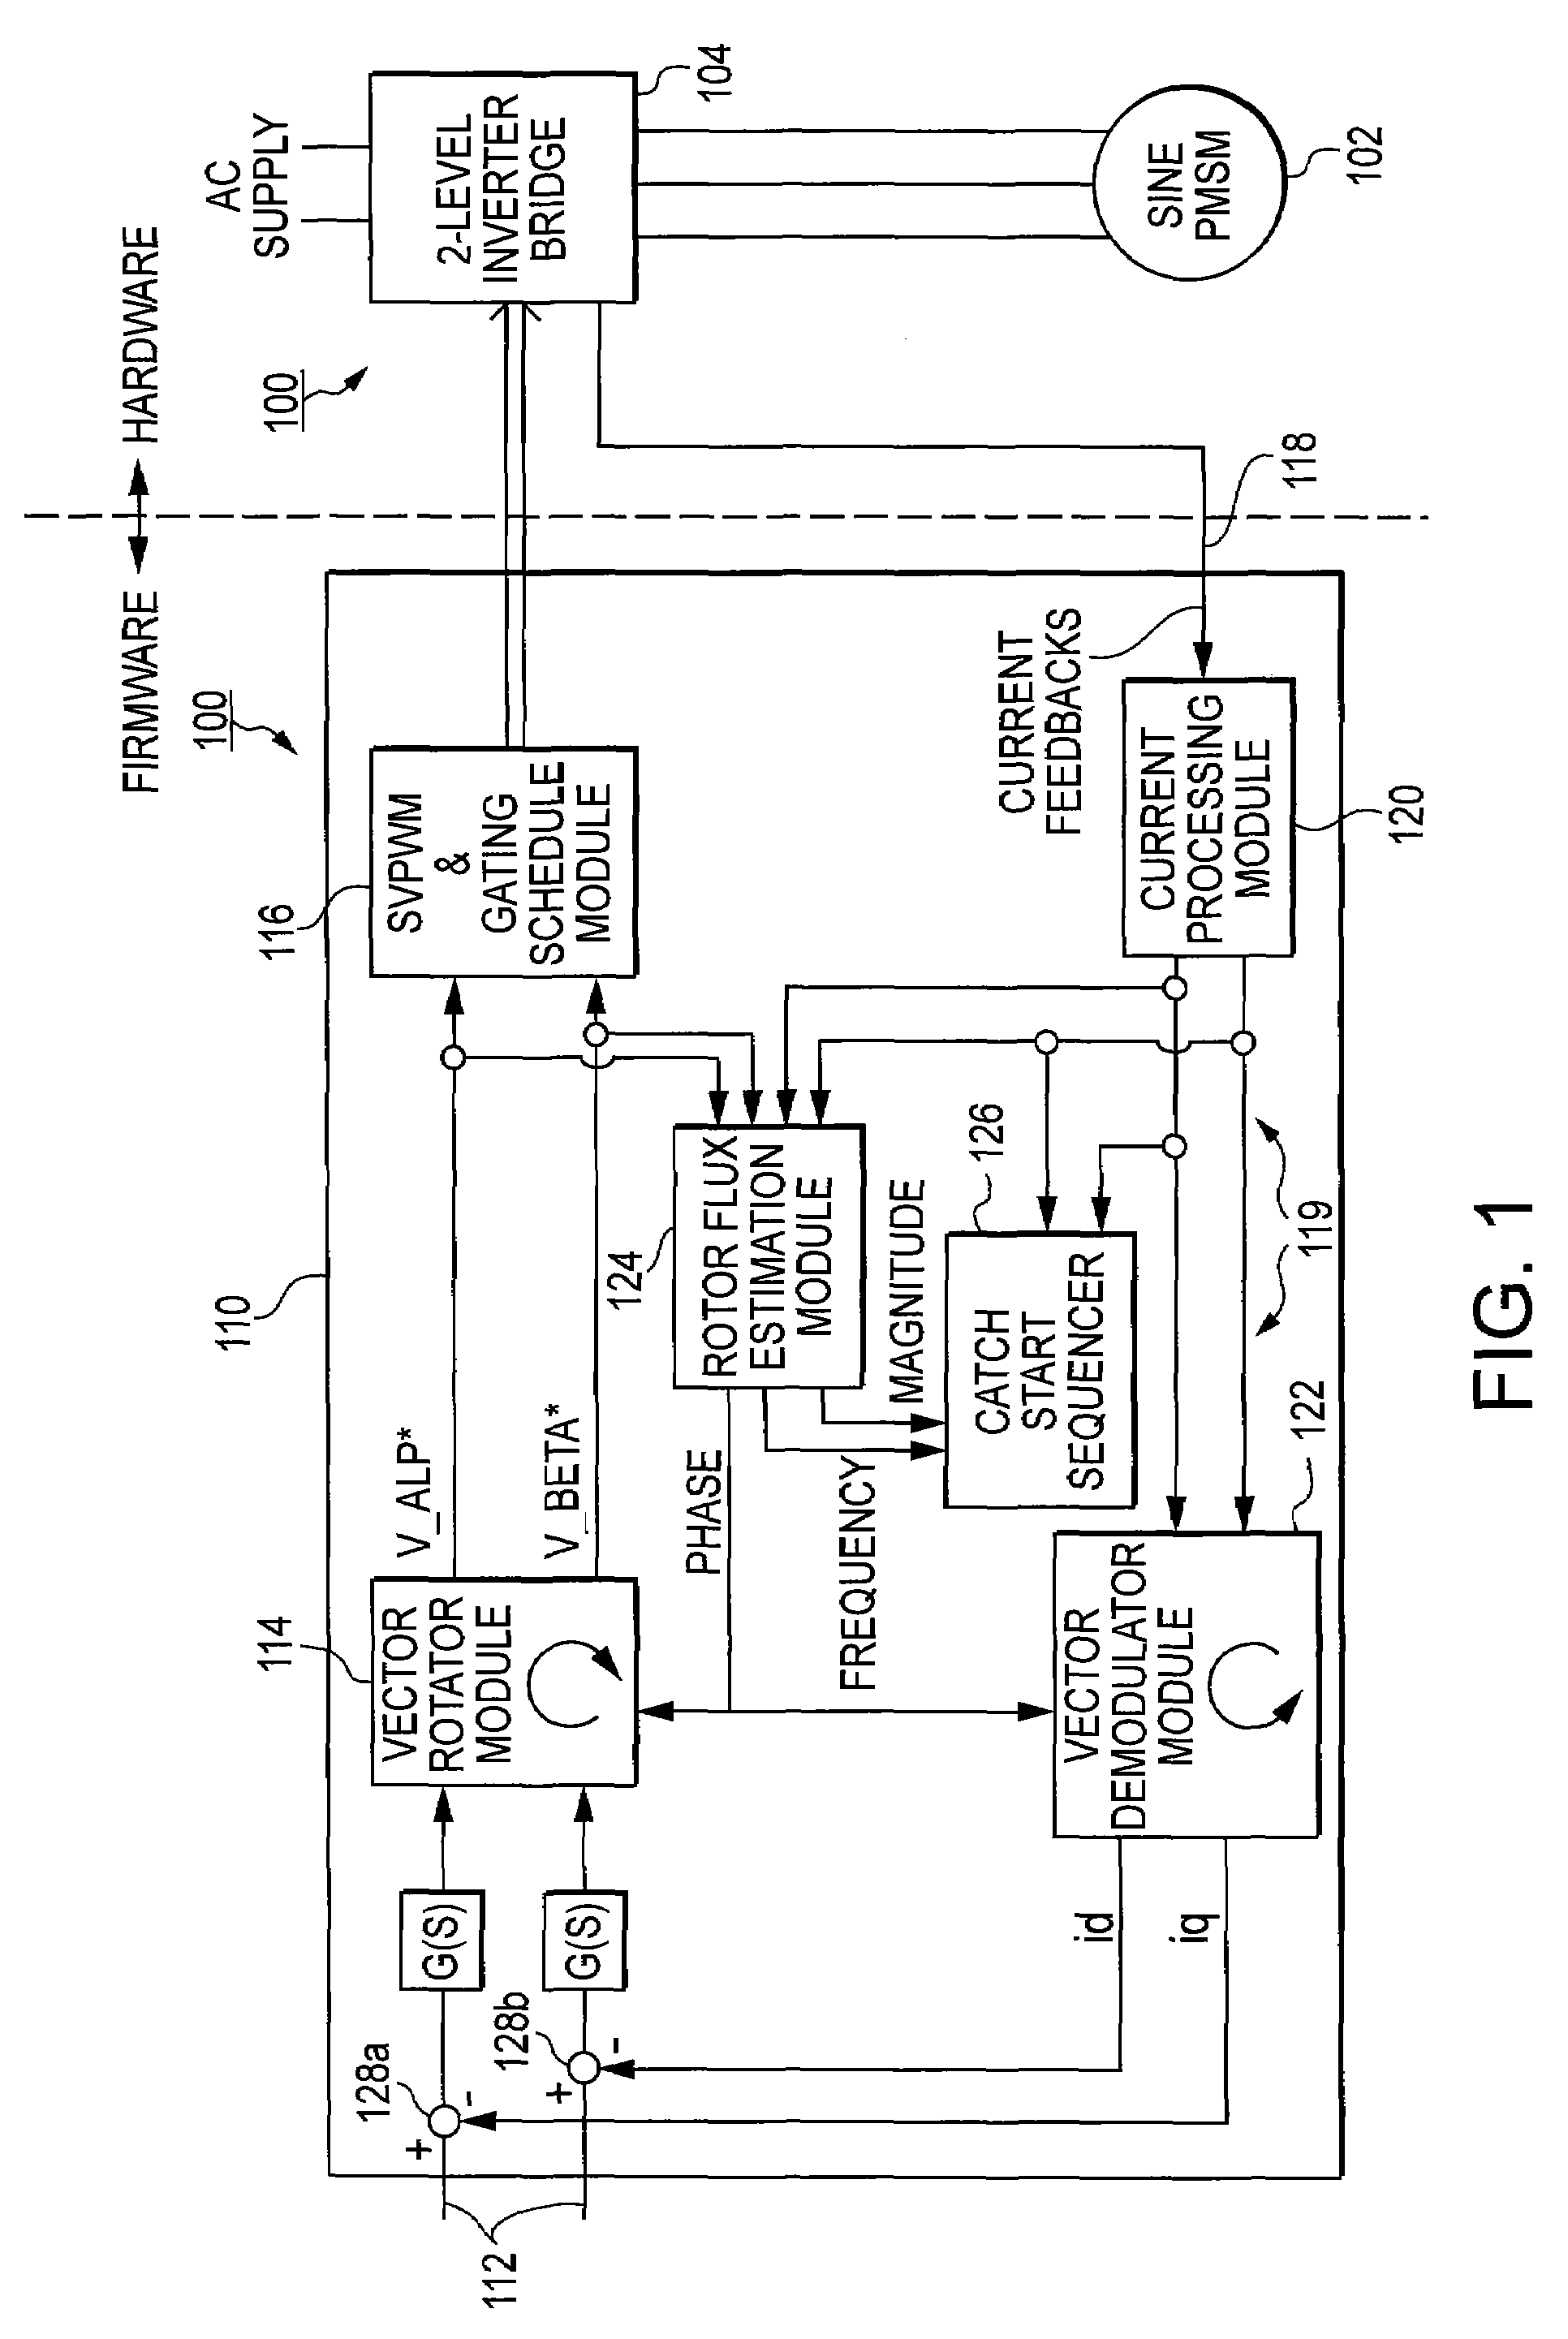 Method and system for starting a sensorless motor